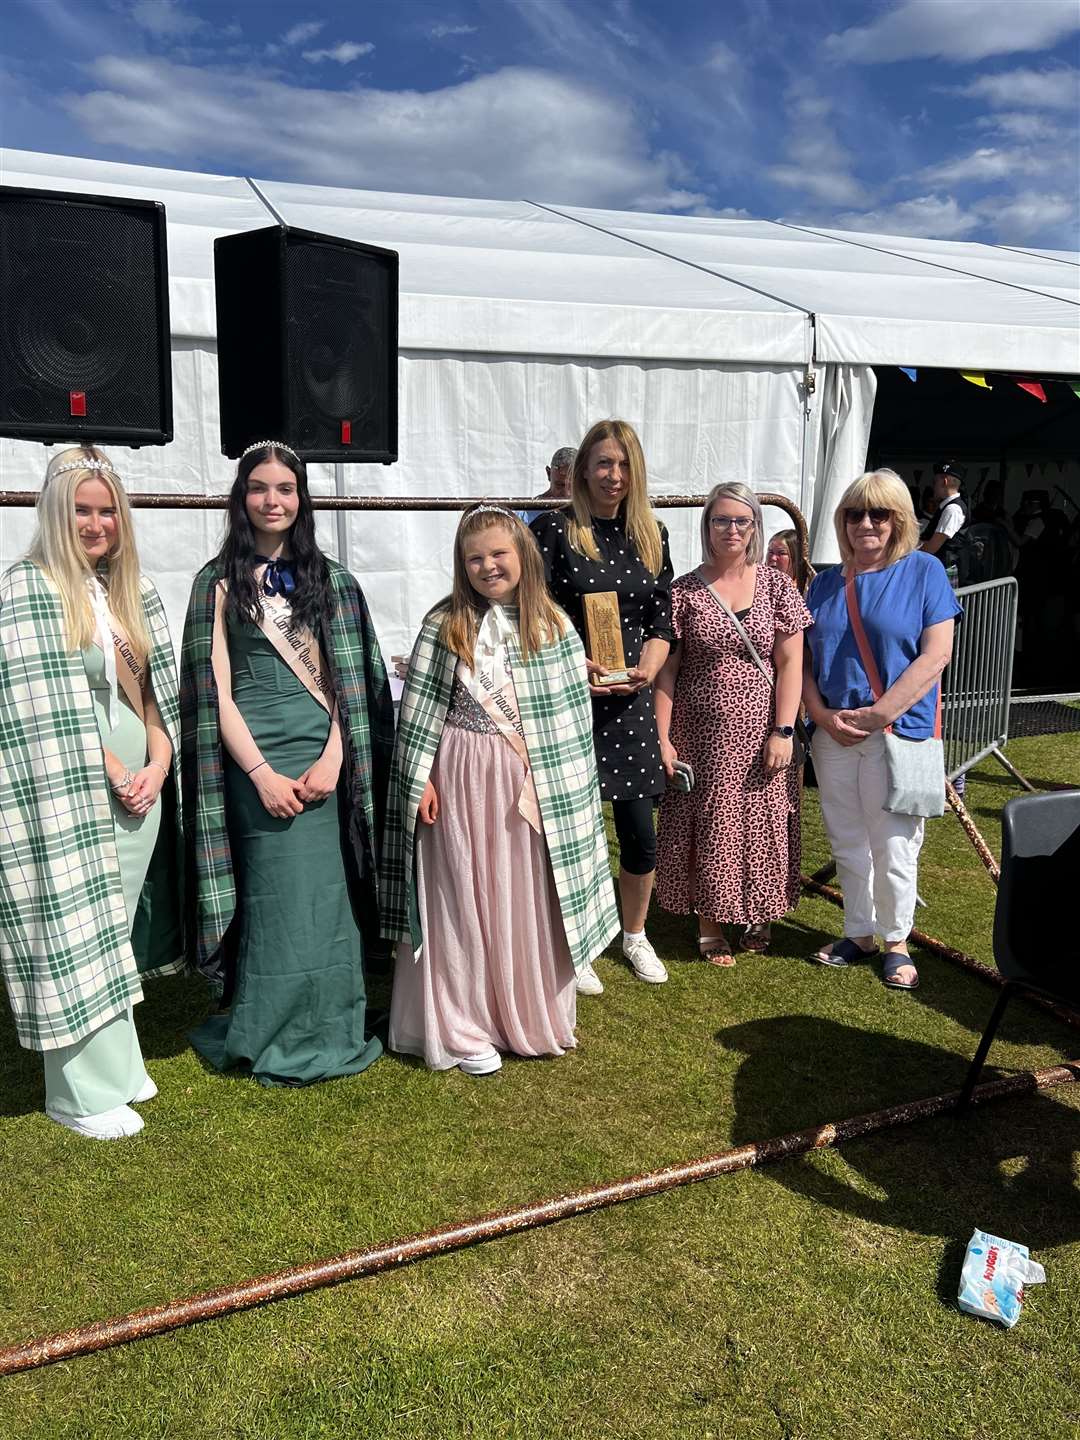 Carnival Queen Holly Preston, princess Daisy Cameron and attendant Emma Sutherland presented the community award to Covid-19 volunteers. Annarie Heneghan, Eileen Parkin and Jane Sutherland accepted the award on behalf of all the volunteers.